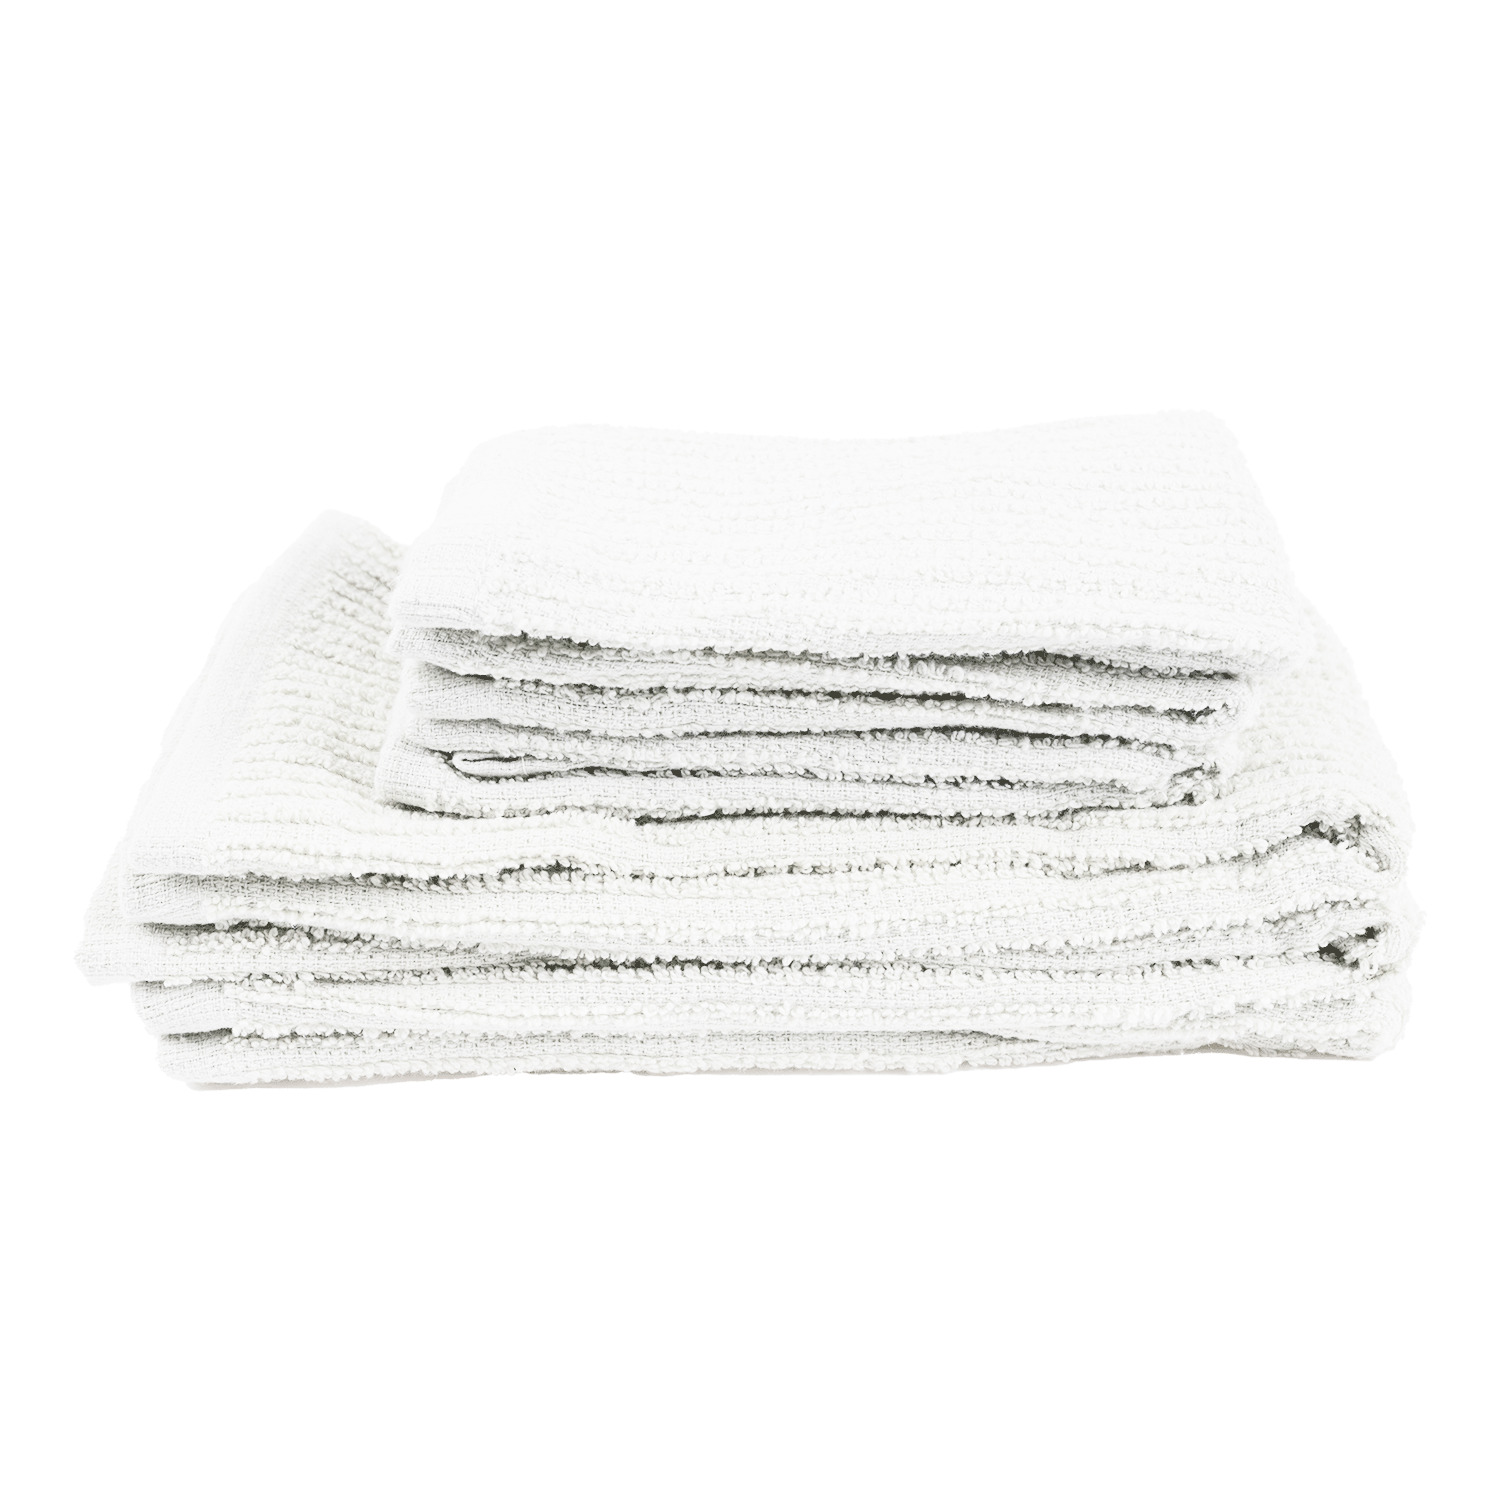 MASTER Chef Terry Cotton Bar Mop Dishcloths, Reusable, 12-in x 12-in, 8-pk,  White